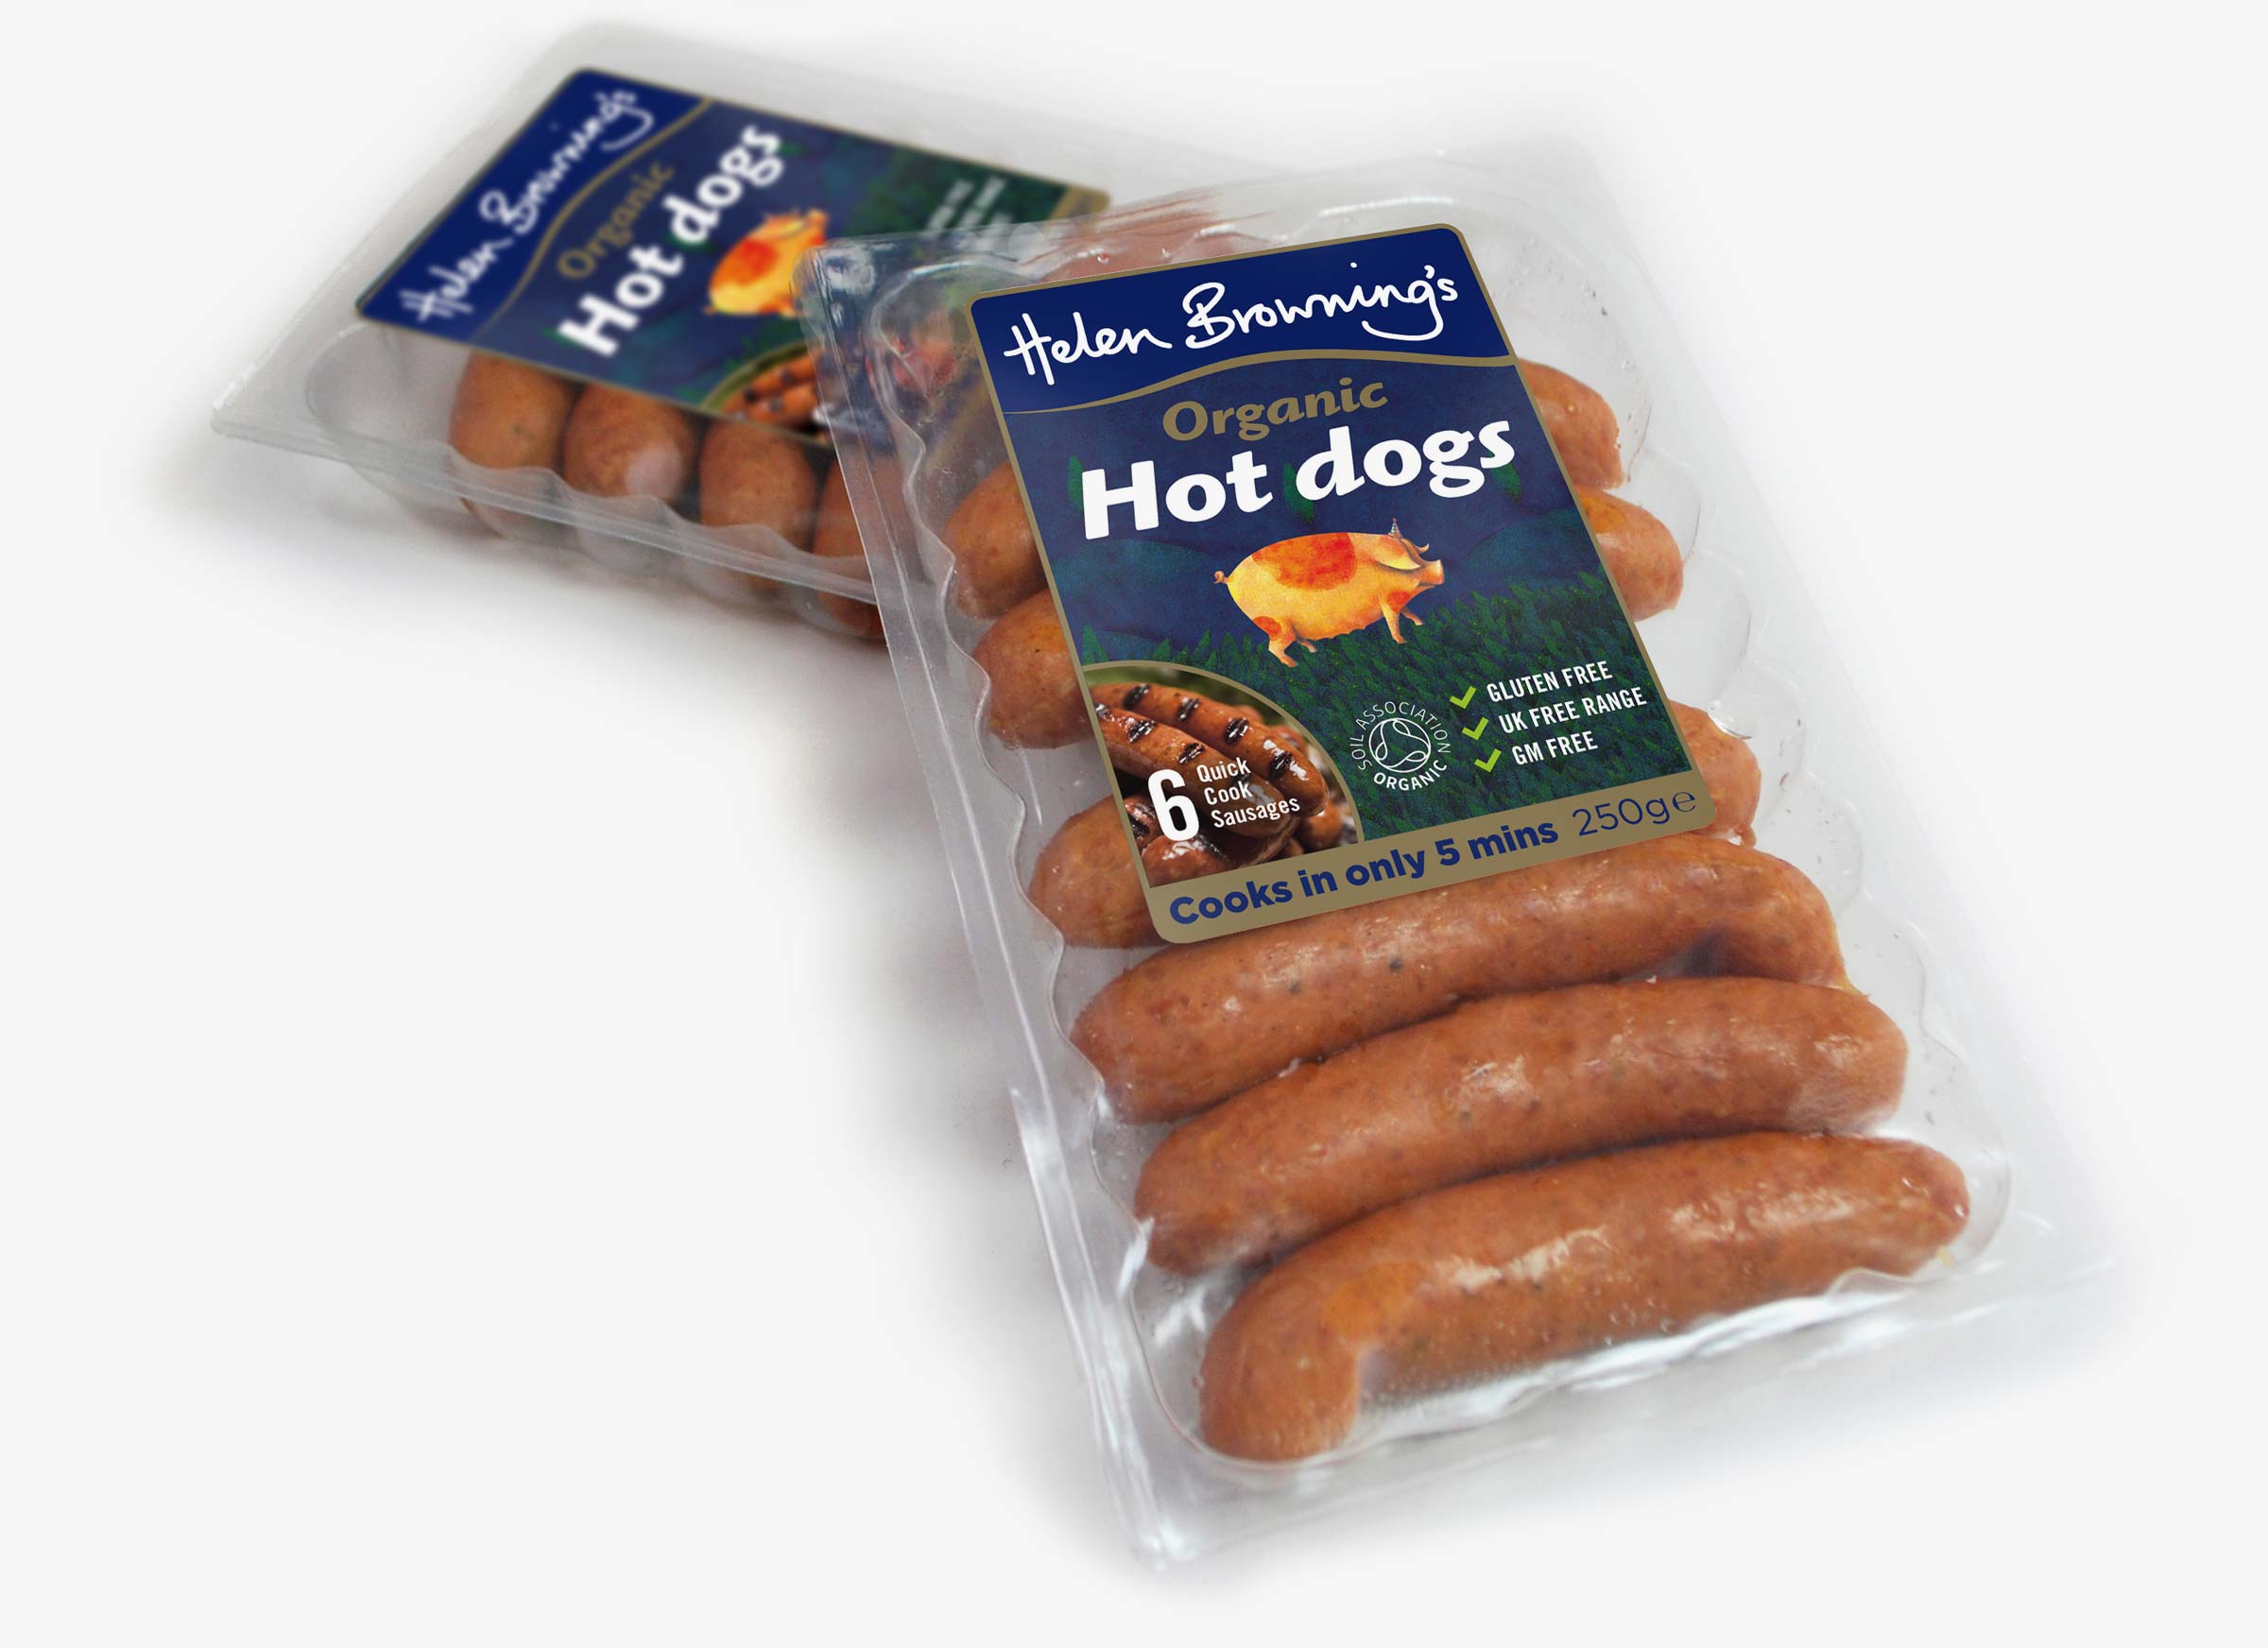 Helen Browning's Organic Hot Dogs